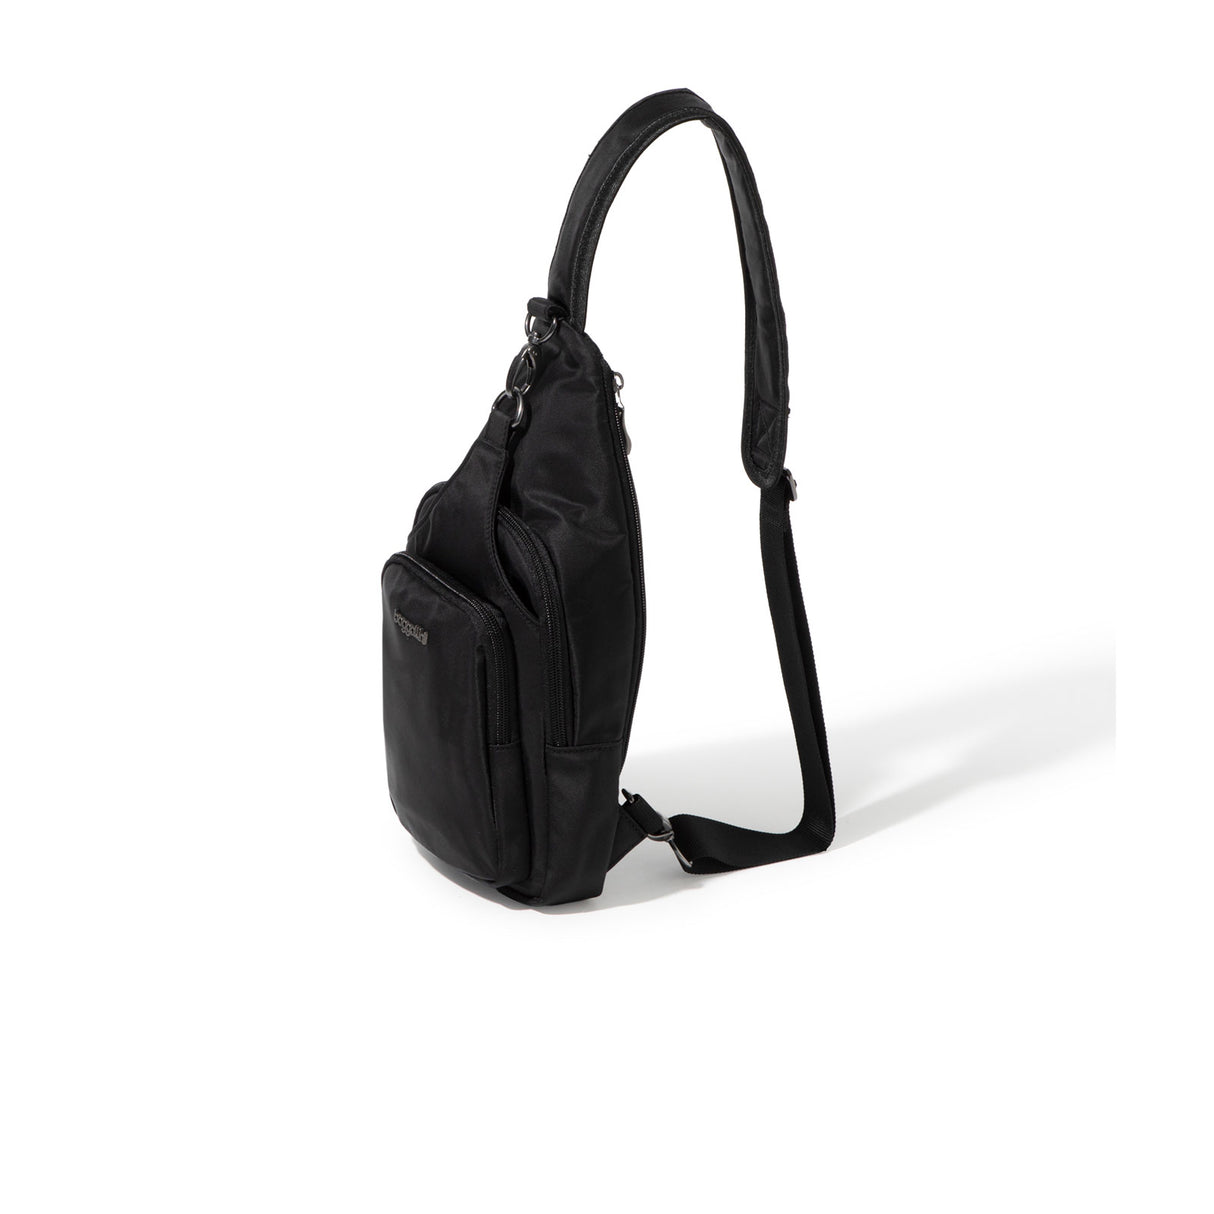 Baggallini Central Park Sling - Black Accessories - Bags - Handbags - The Heel Shoe Fitters